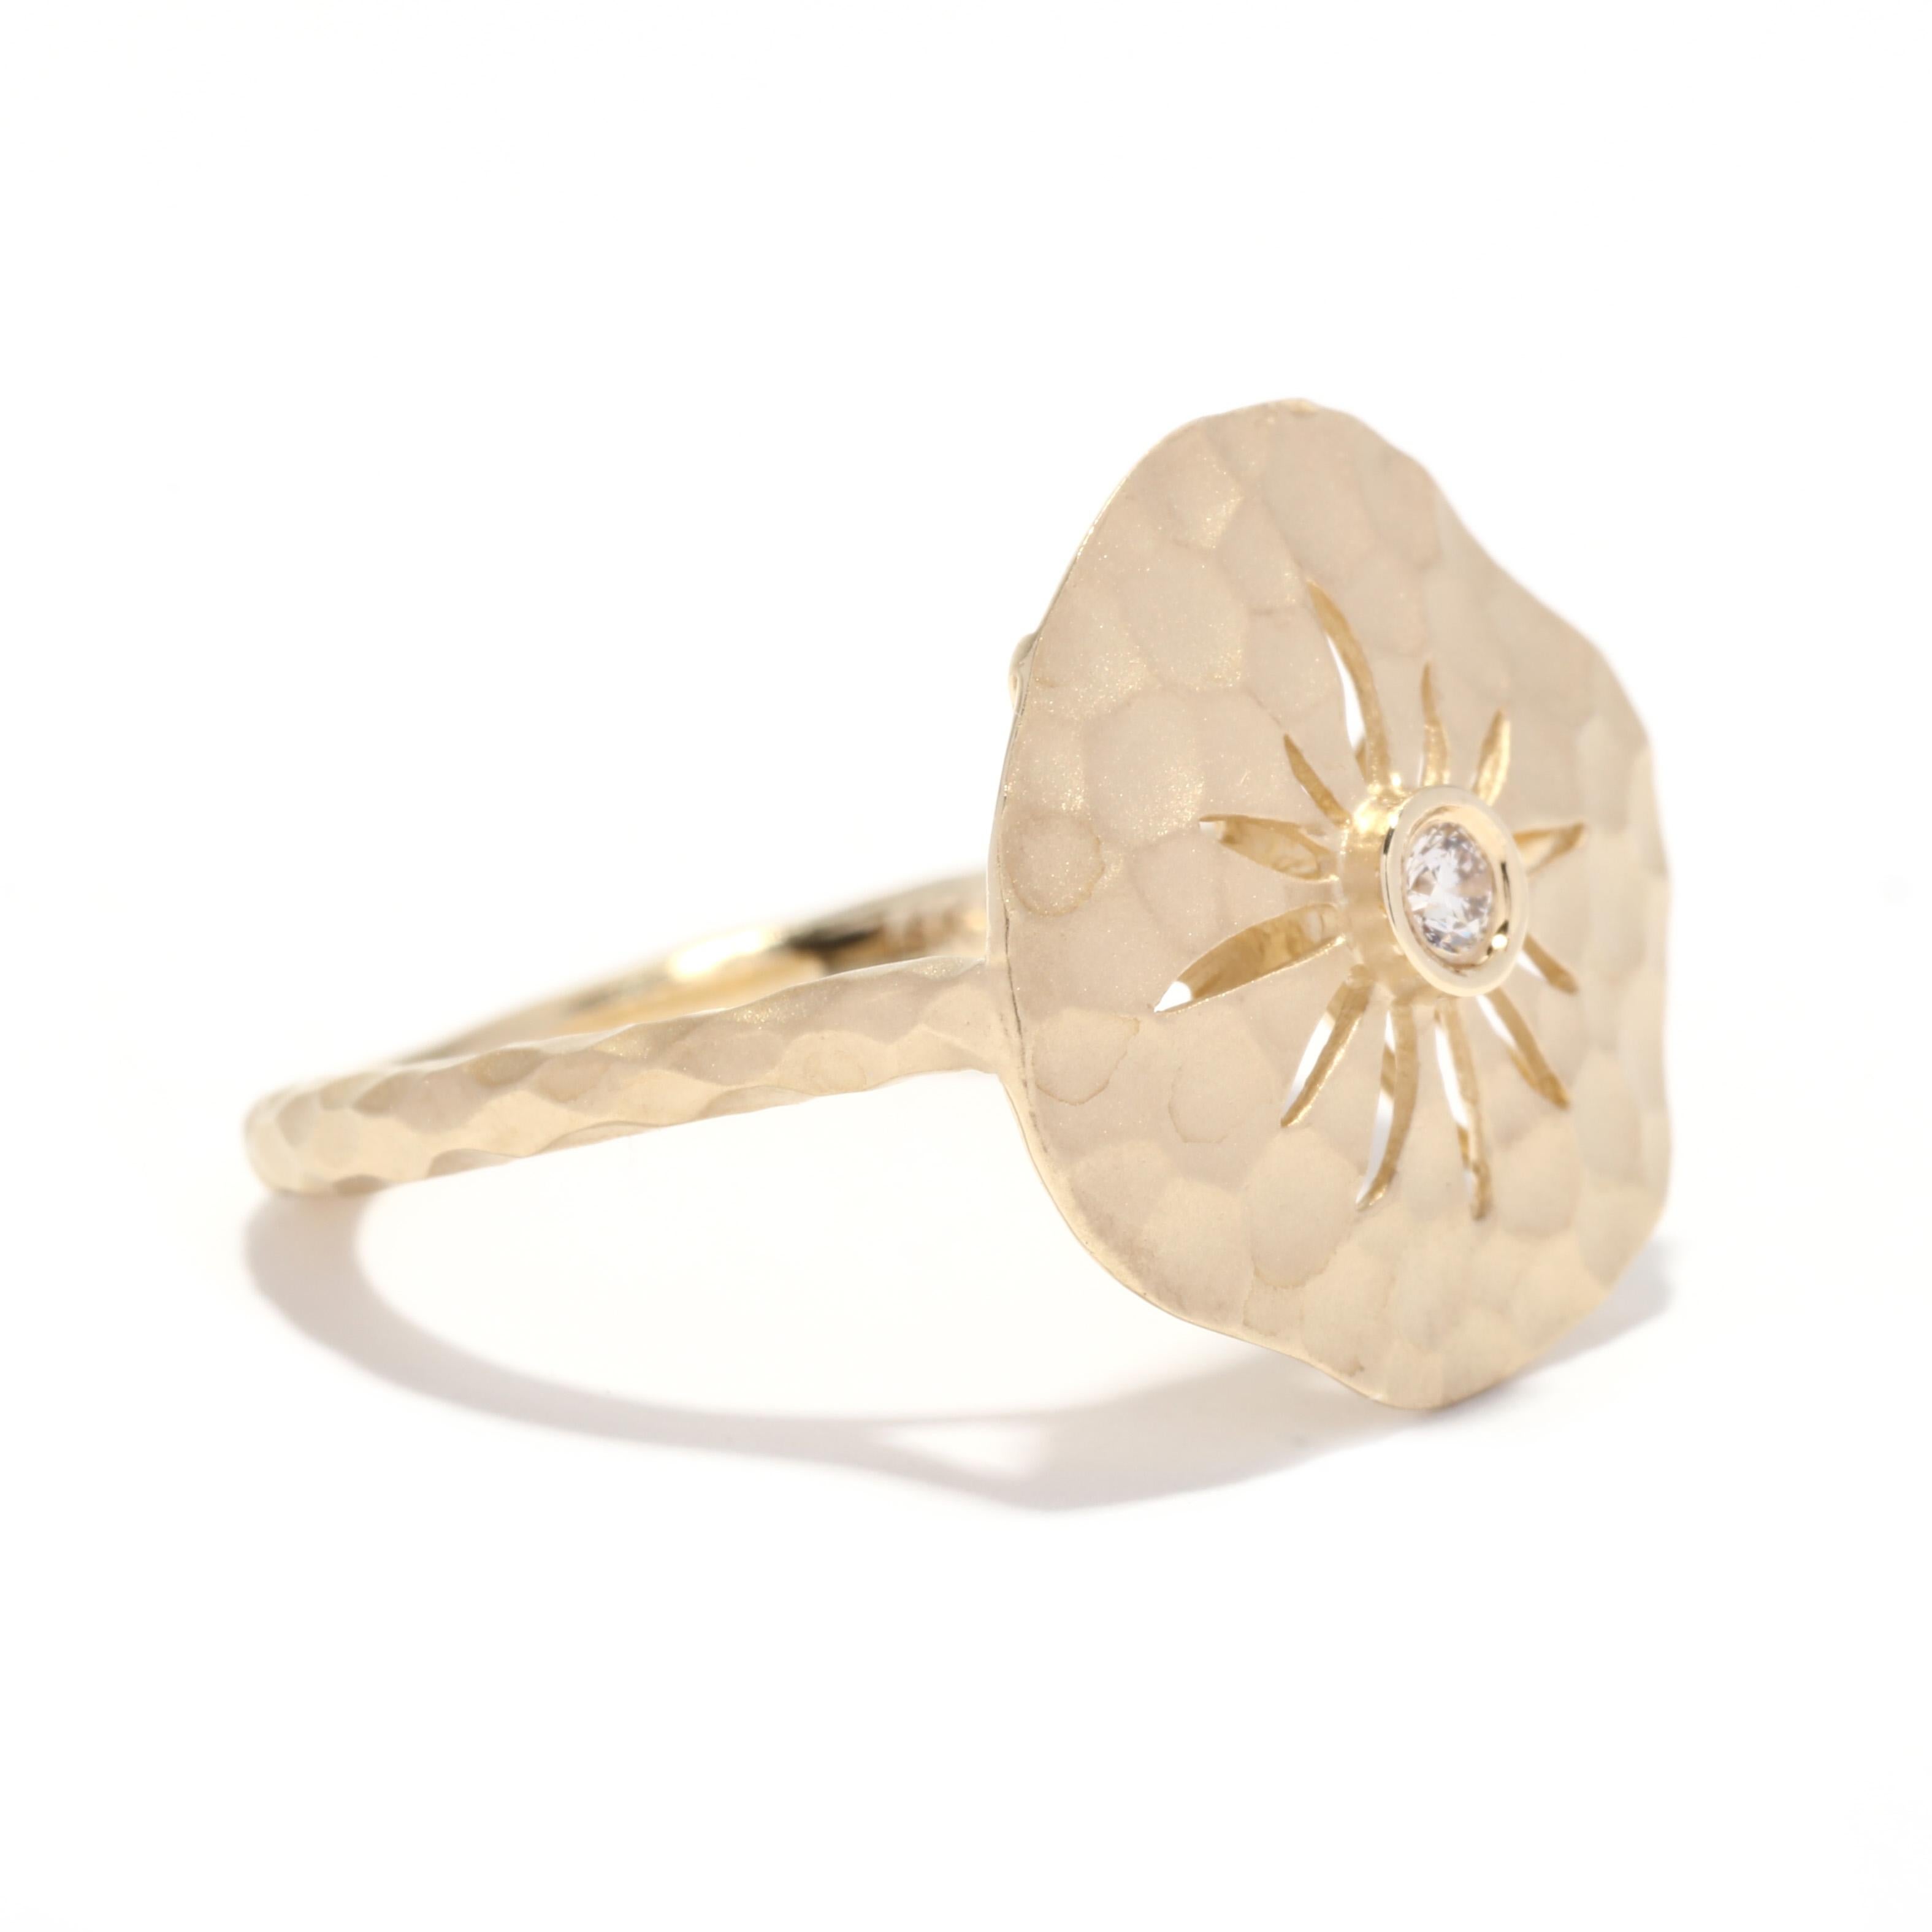 A 14 karat yellow gold diamond sand dollar ring by Gabriel. This ring feats a matte, hammered sand dollar motif with a bezel set, full cut round diamond in the center weighing .03 carat and a thin hammered band.

Stones:
- diamond, 1 stone
- full